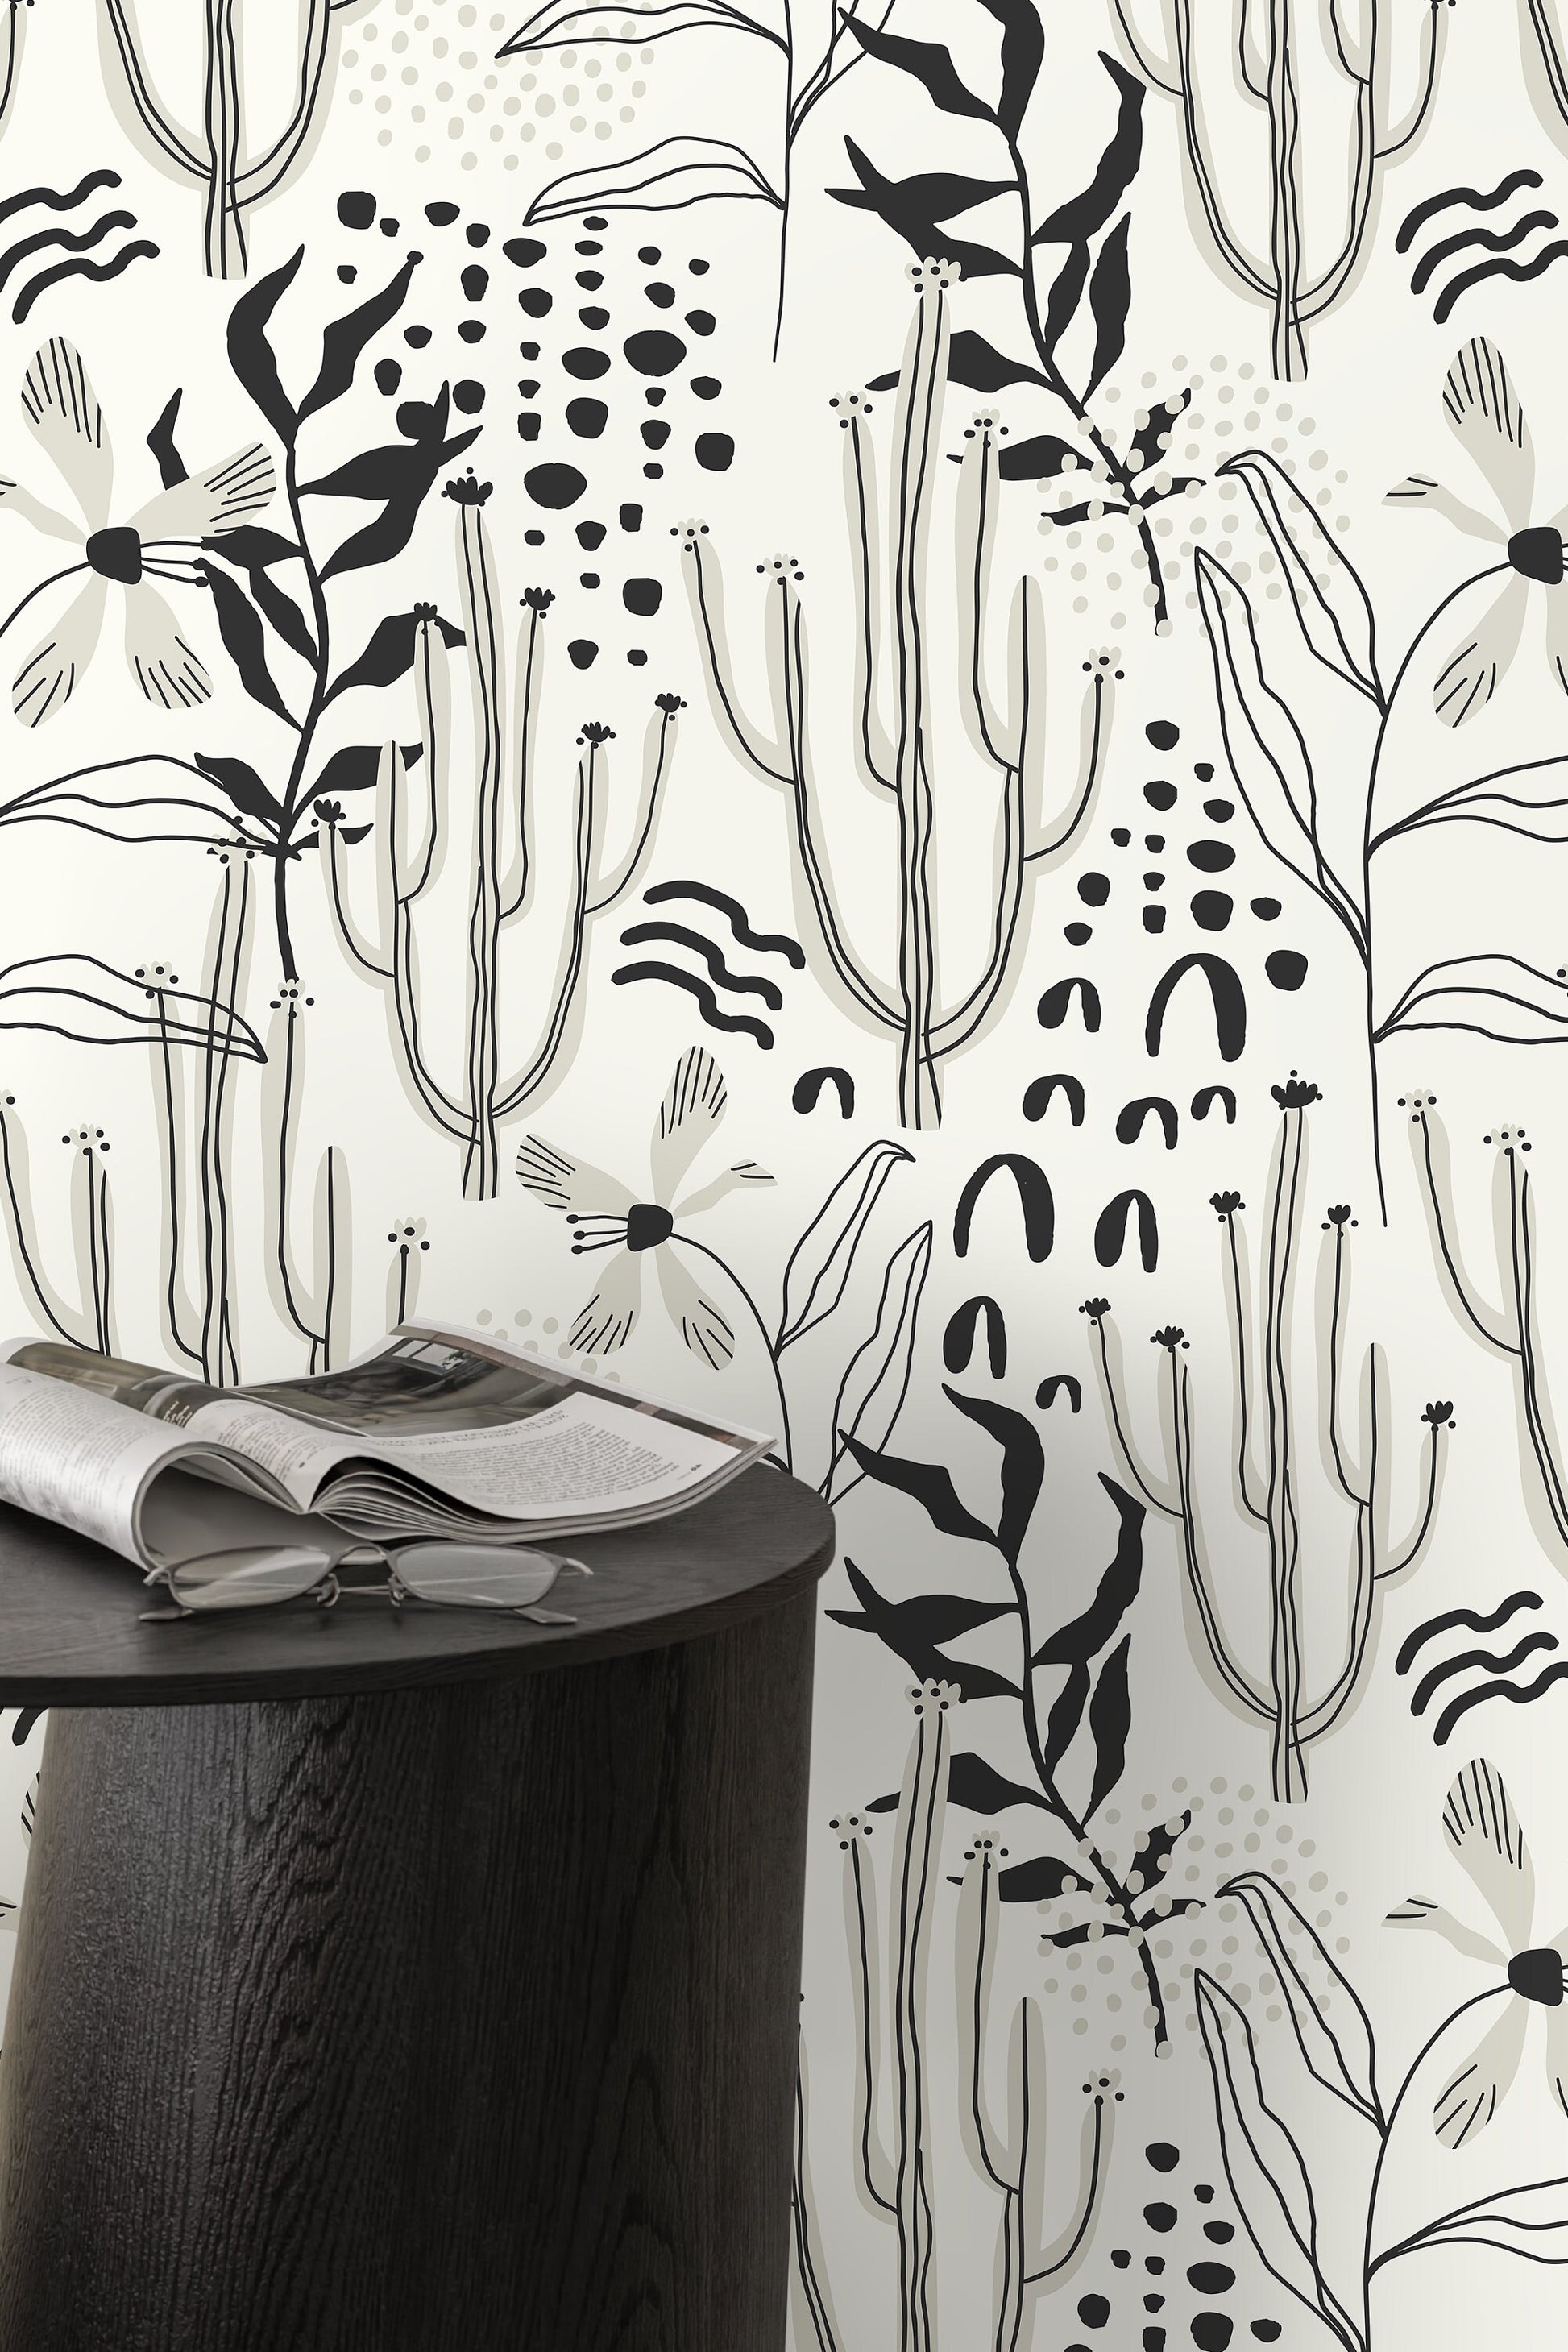 Black and Gray Floral Wallpaper / Peel and Stick Wallpaper Removable Wallpaper Home Decor Wall Art Wall Decor Room Decor - D315